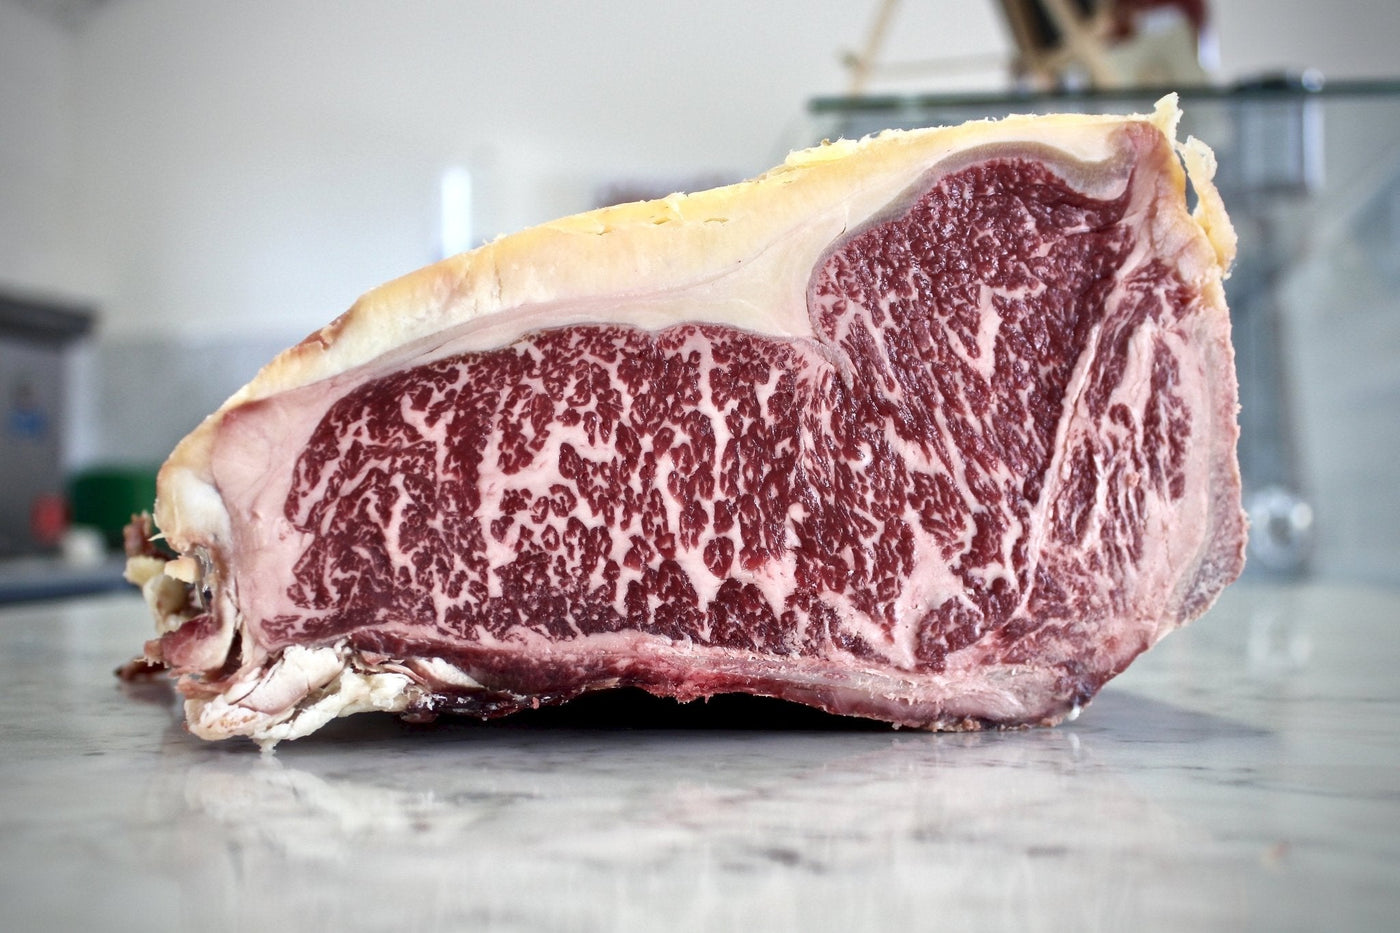 Dry-Aged Ex-Dairy Sirloin On The Bone - Beef - Thomas Joseph Butchery - Ethical Dry-Aged Meat The Best Steak UK Thomas Joseph Butchery